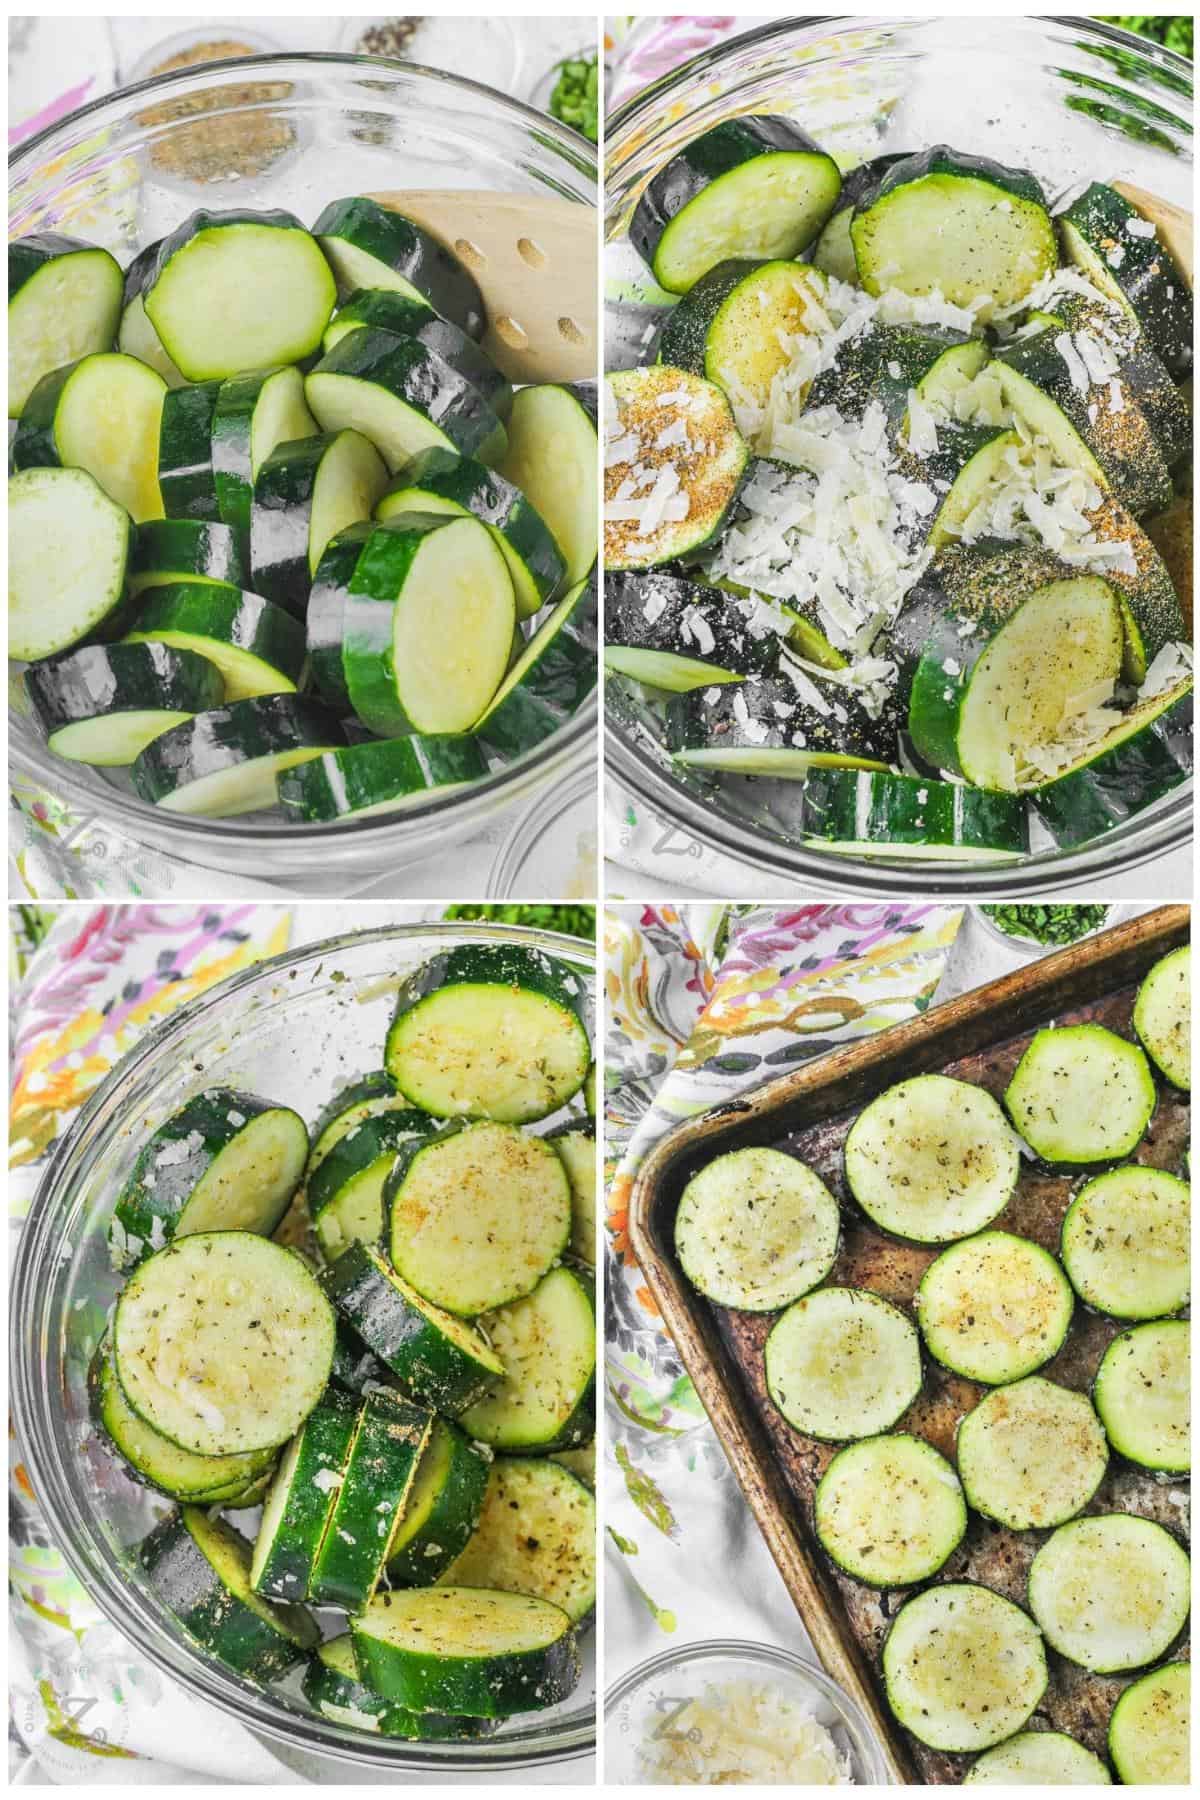 process of adding ingredients together to make Baked Parmesan Zucchini